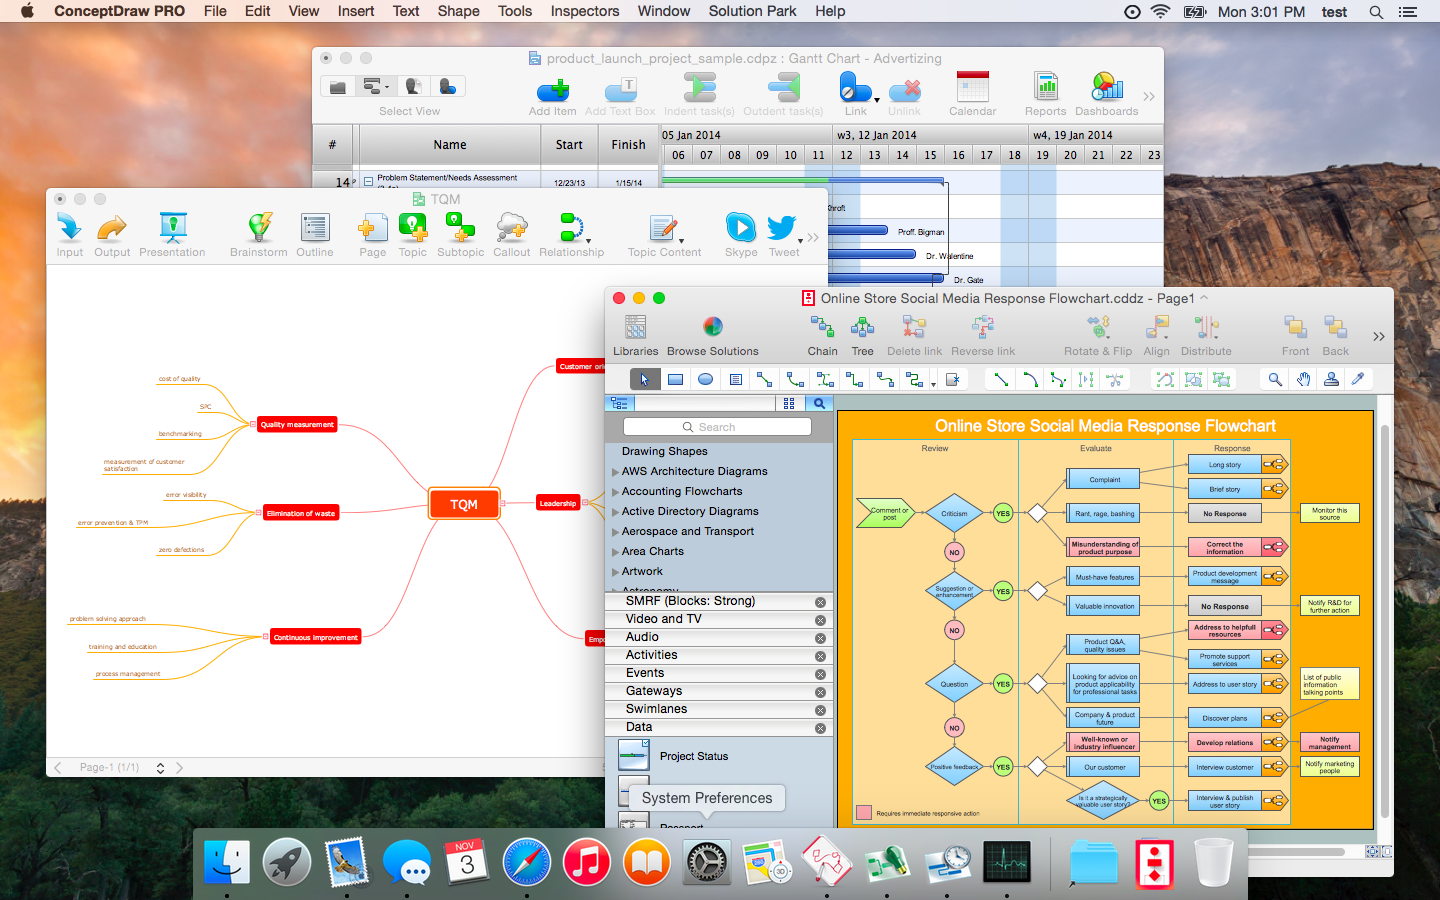 ConceptDraw Applications support Yosemite